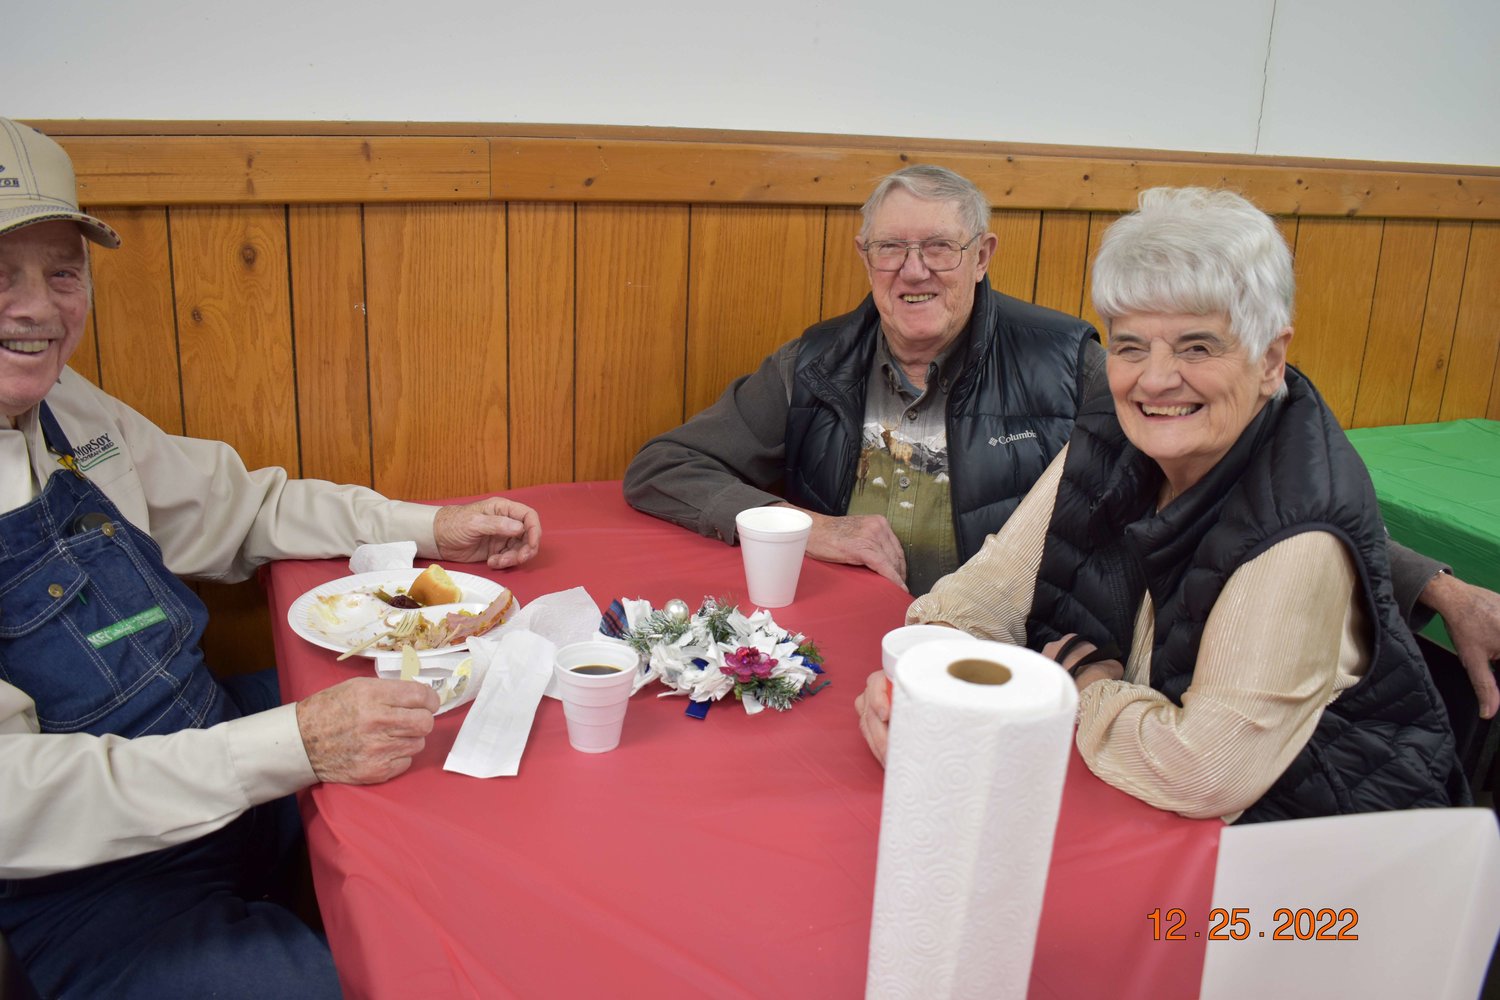 Members of Knights of Columbus Jay Harris Council 8620 and Ladies Auxiliary in Warsaw serve the council’s 37th annual Christmas Dinner on Dec. 25, 2022. Volunteers served between 350 and 400 meals to people who were hungry, homebound or otherwise in need of a good meal and cheerful company on Christmas Day.